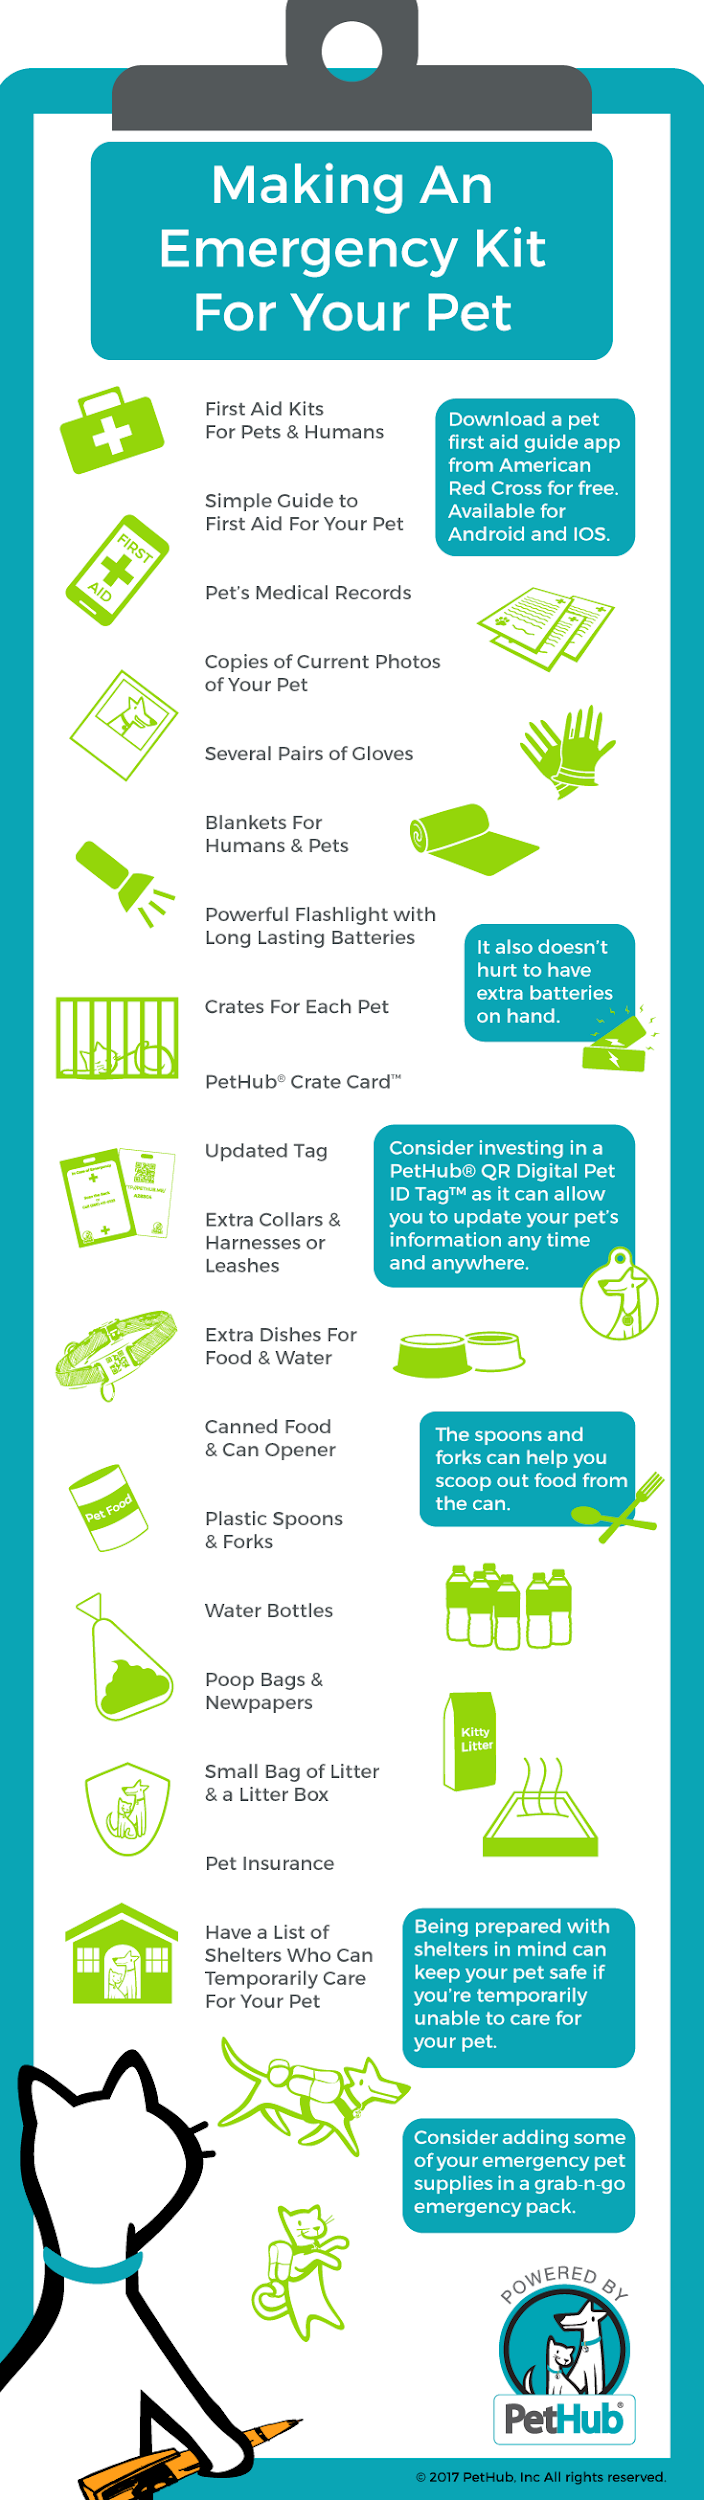 Making an emergency kit for your pet infographic